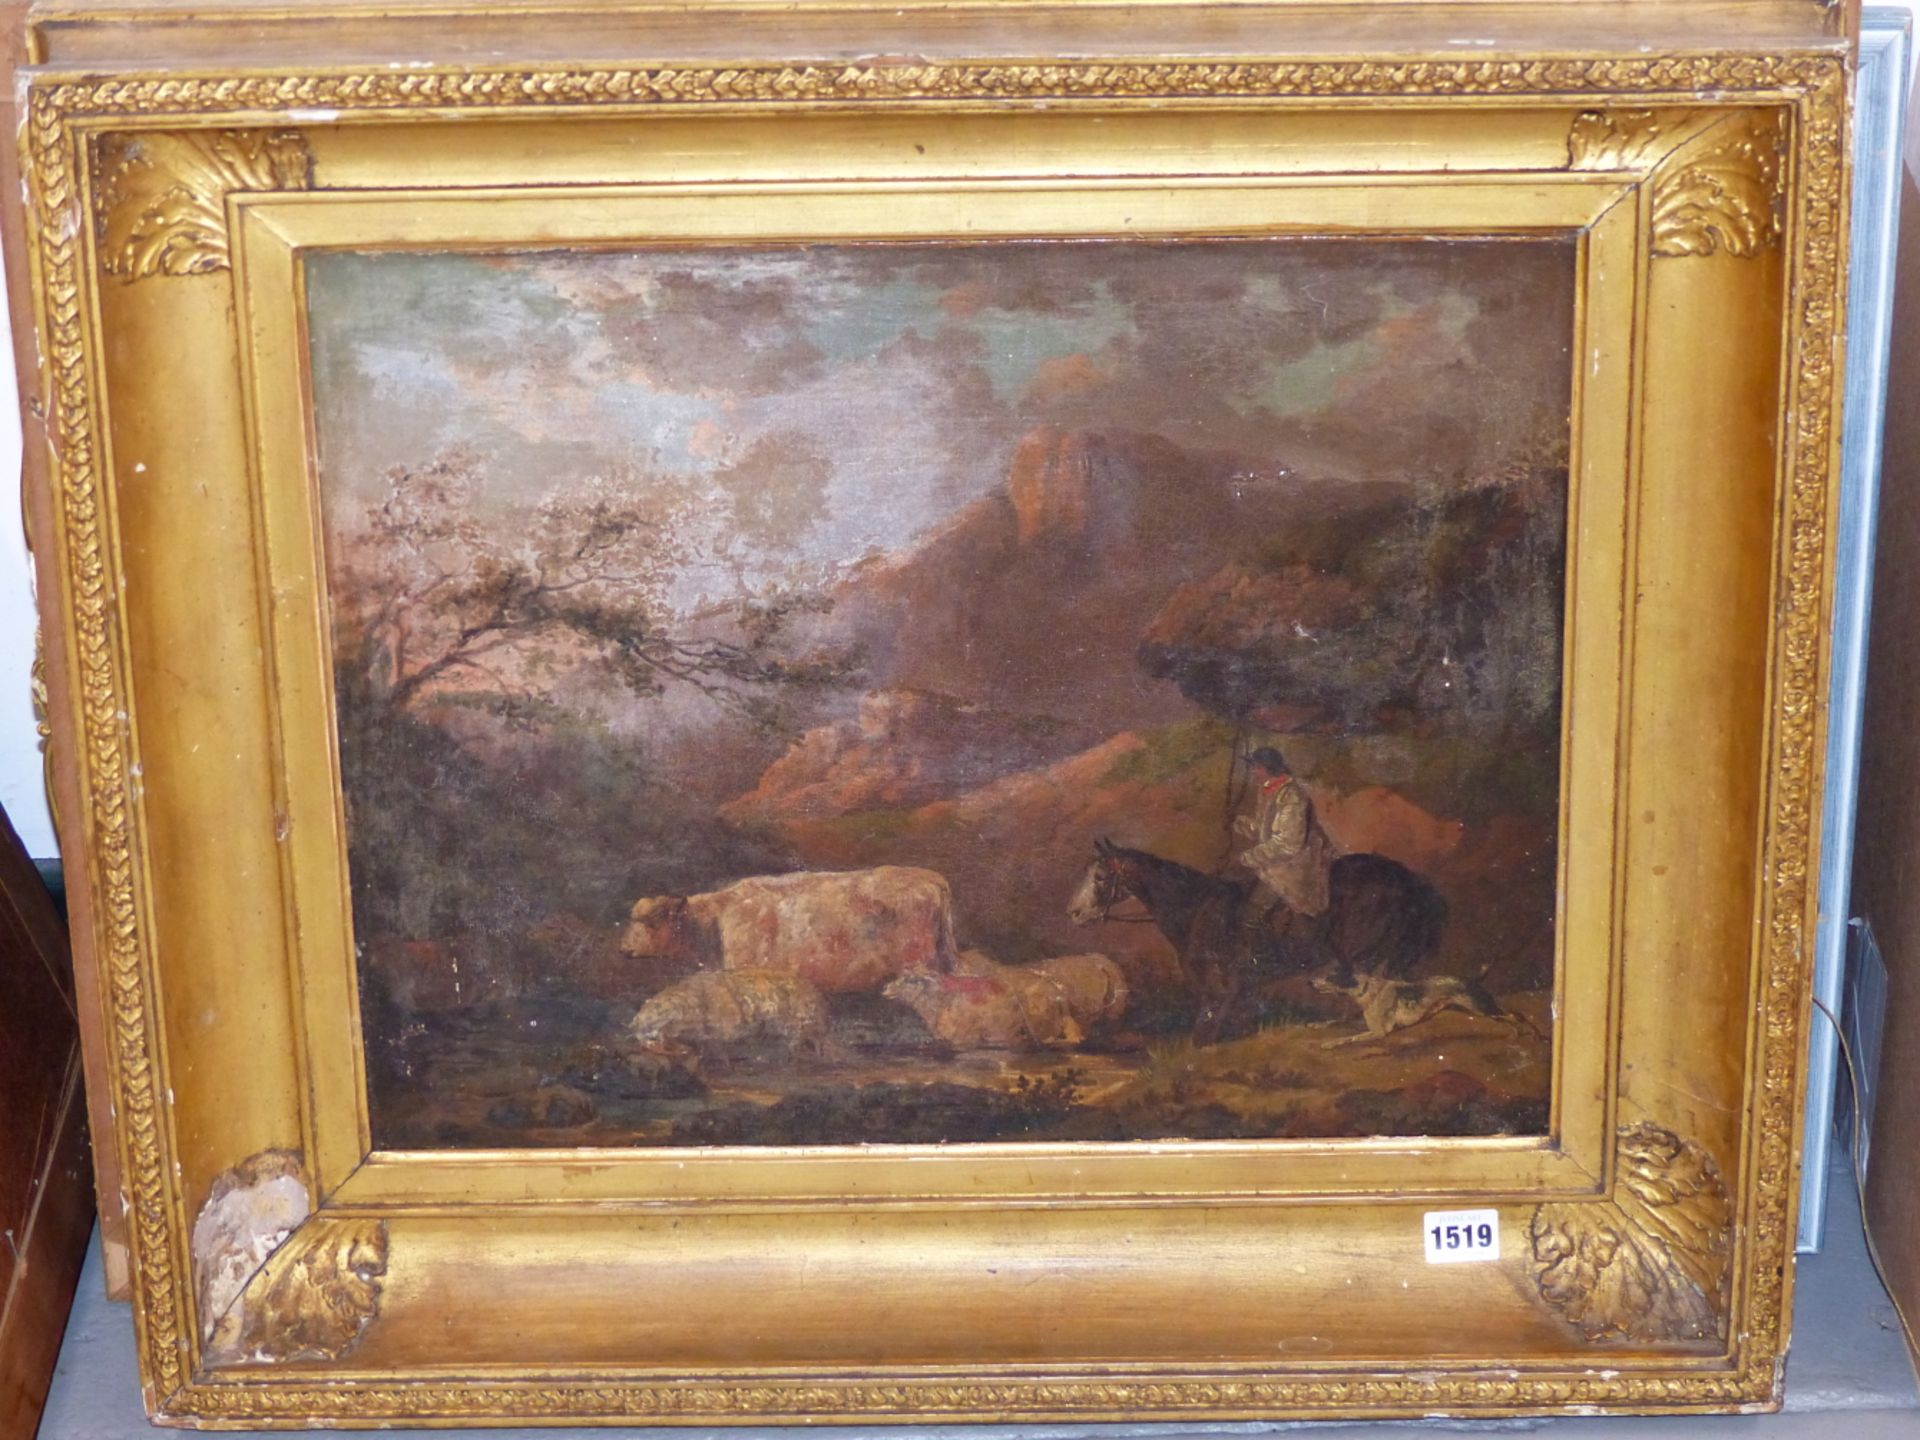 19th C. ENGLISH SCHOOL IN THE MANNER OF GEORGE MORLAND. HERDING THE CATTLE, OIL ON CANVAS. 41 x - Image 3 of 11